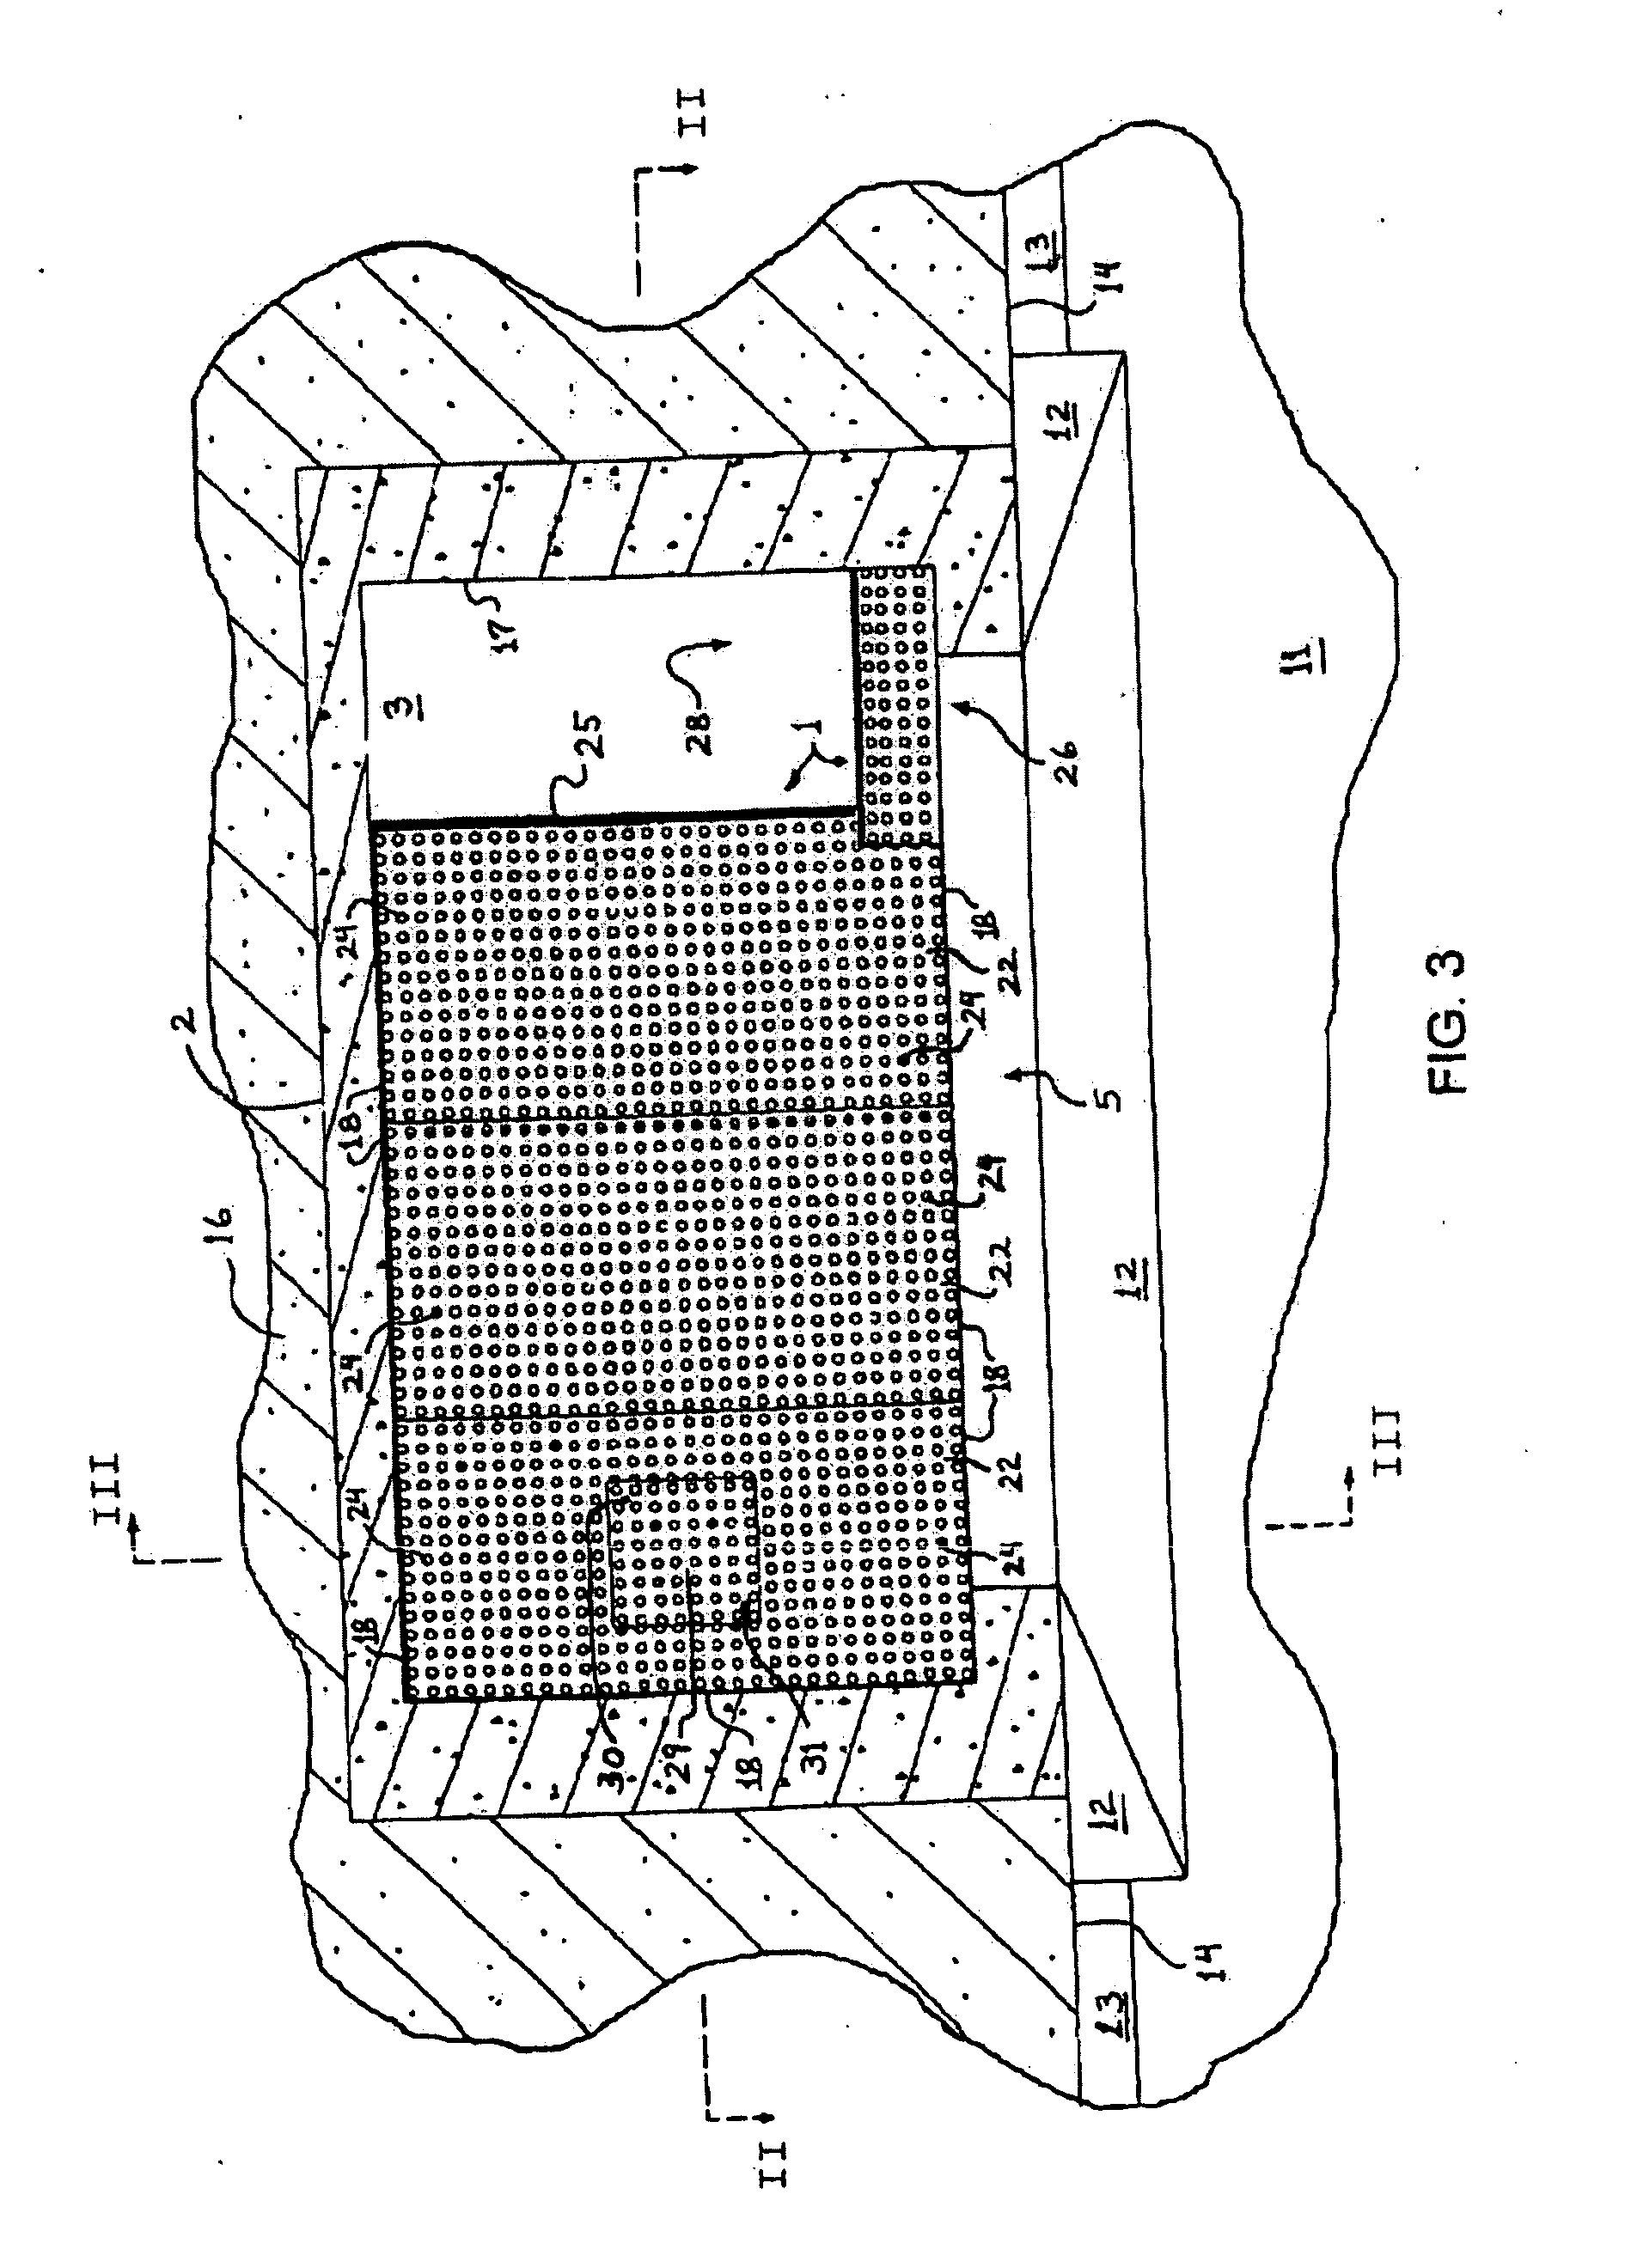 Catch basin apparatus and method of use for the same